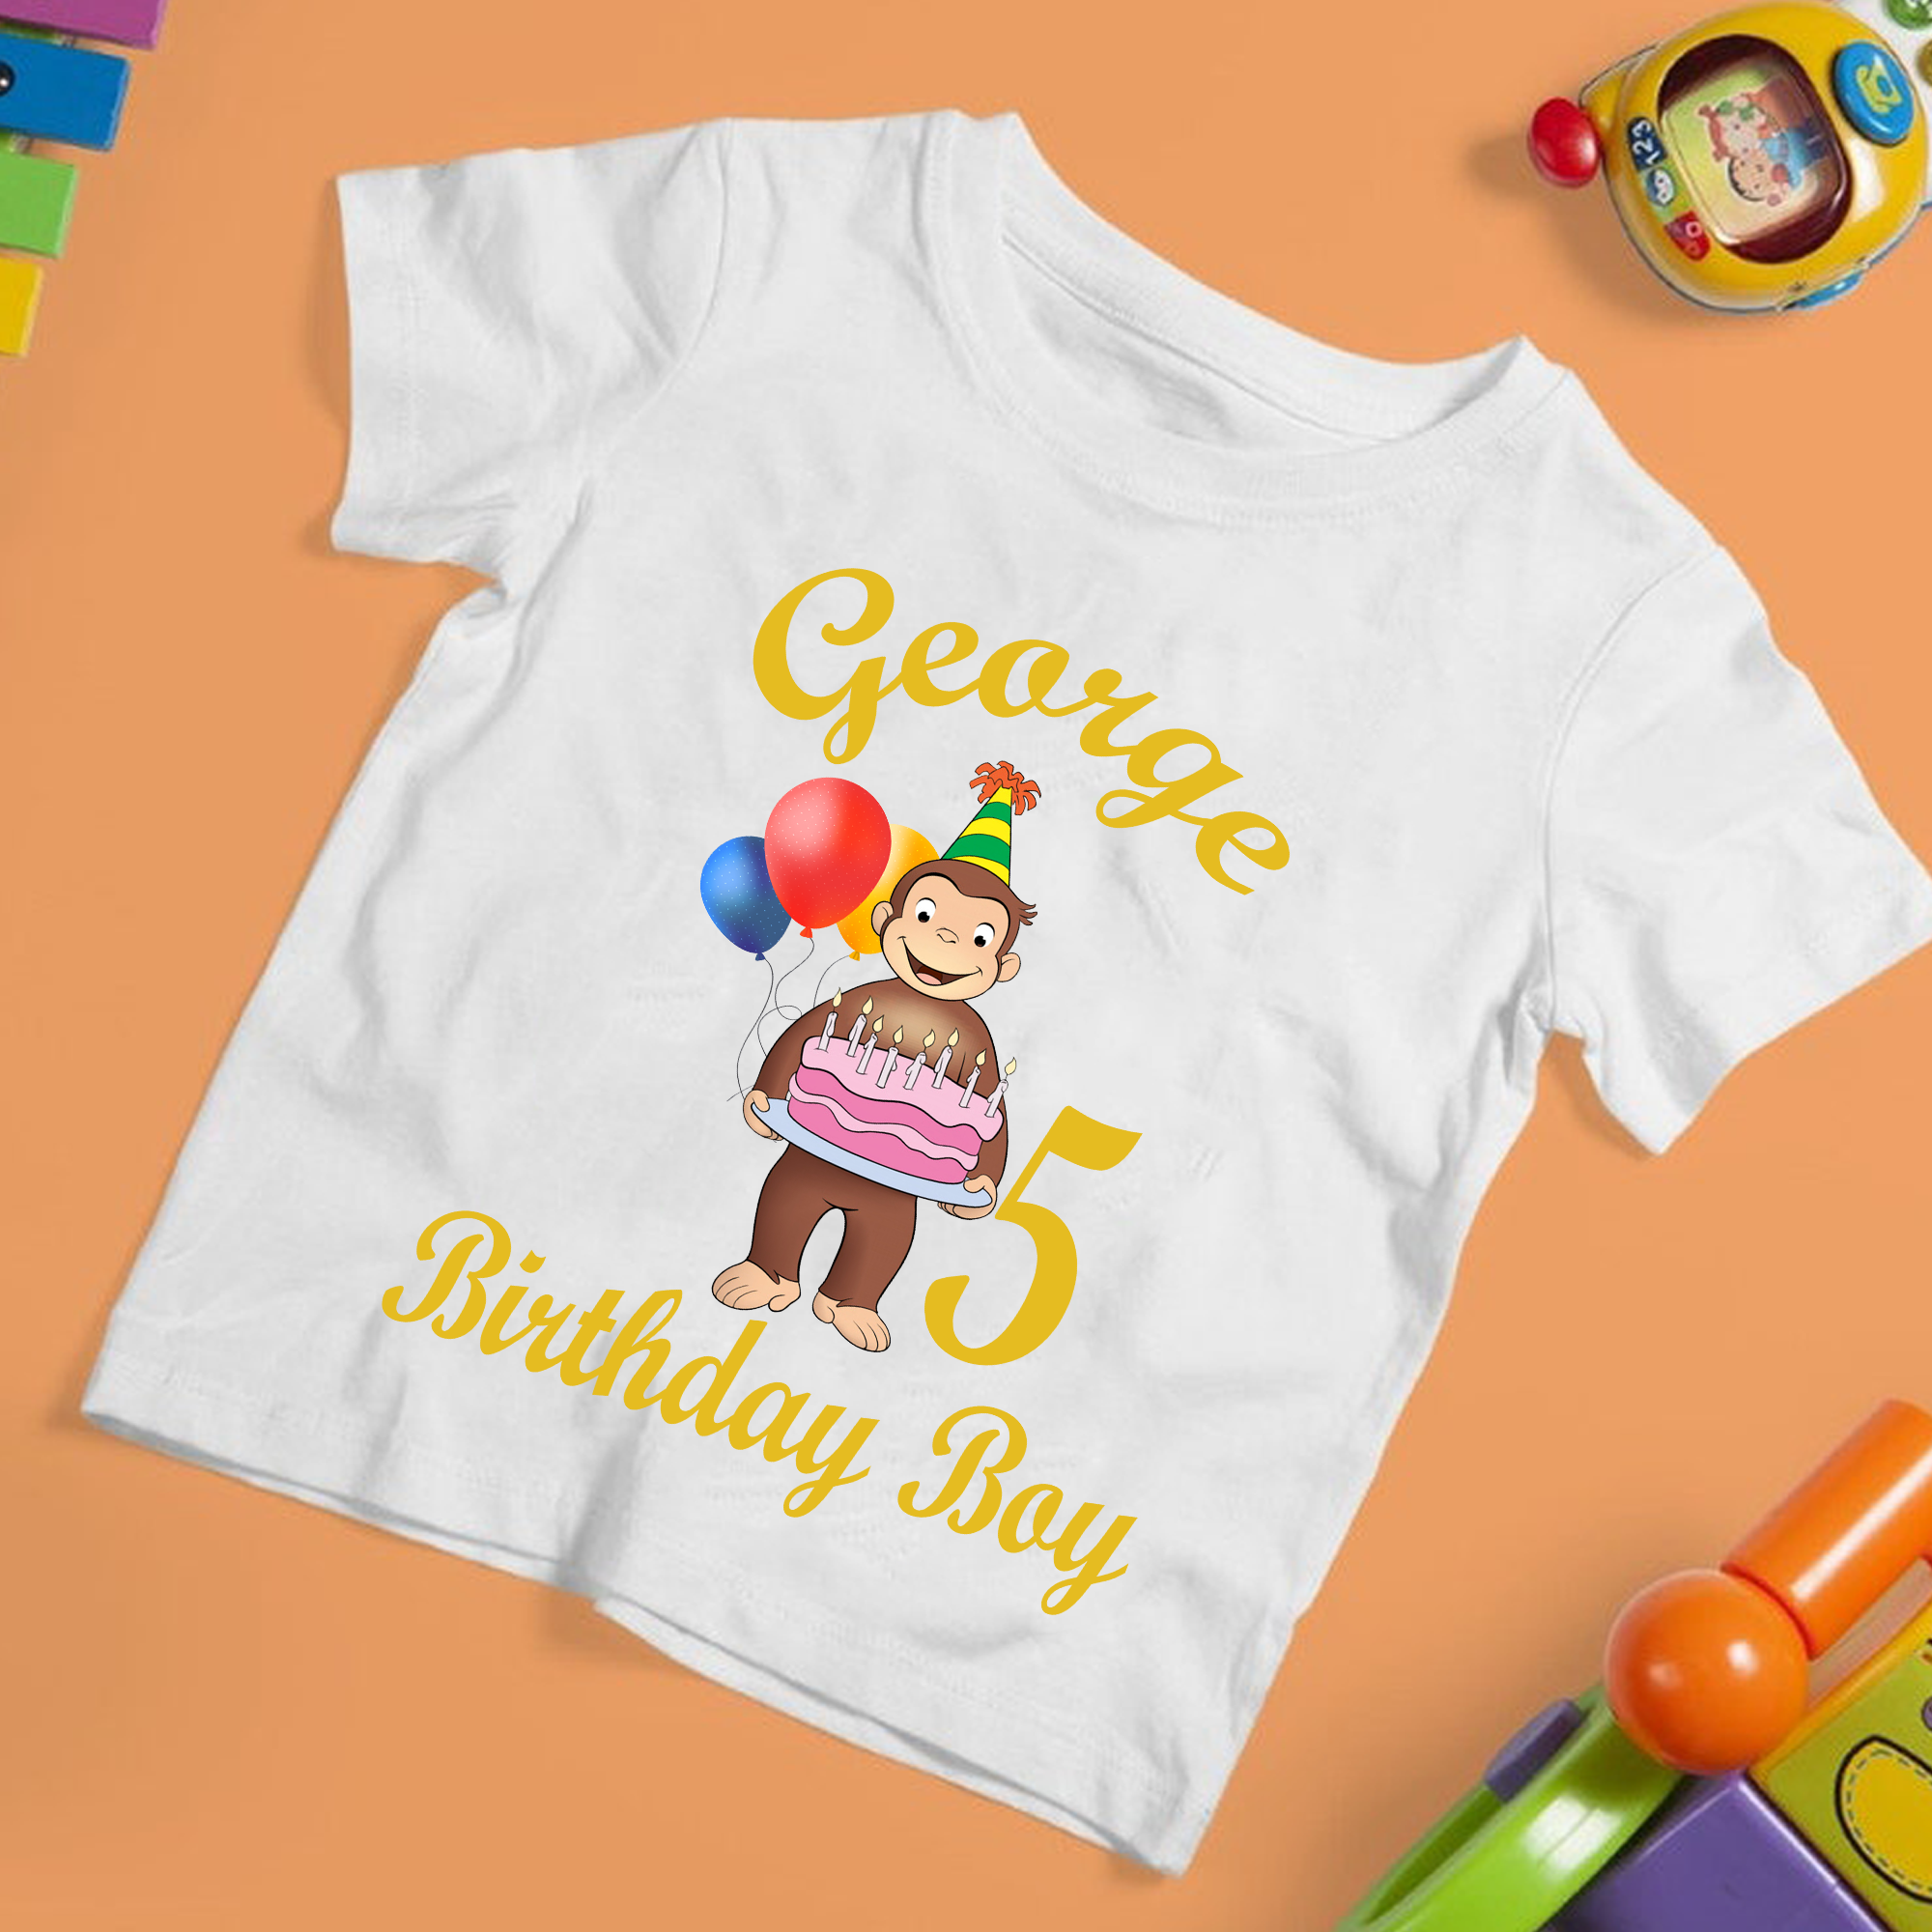 Personalized Curious George Birthday Shirt,Custom Curious George Family shirt,Monkey Kid Shirt,Monkey Birthday Shirt,Kids Matching Shirt